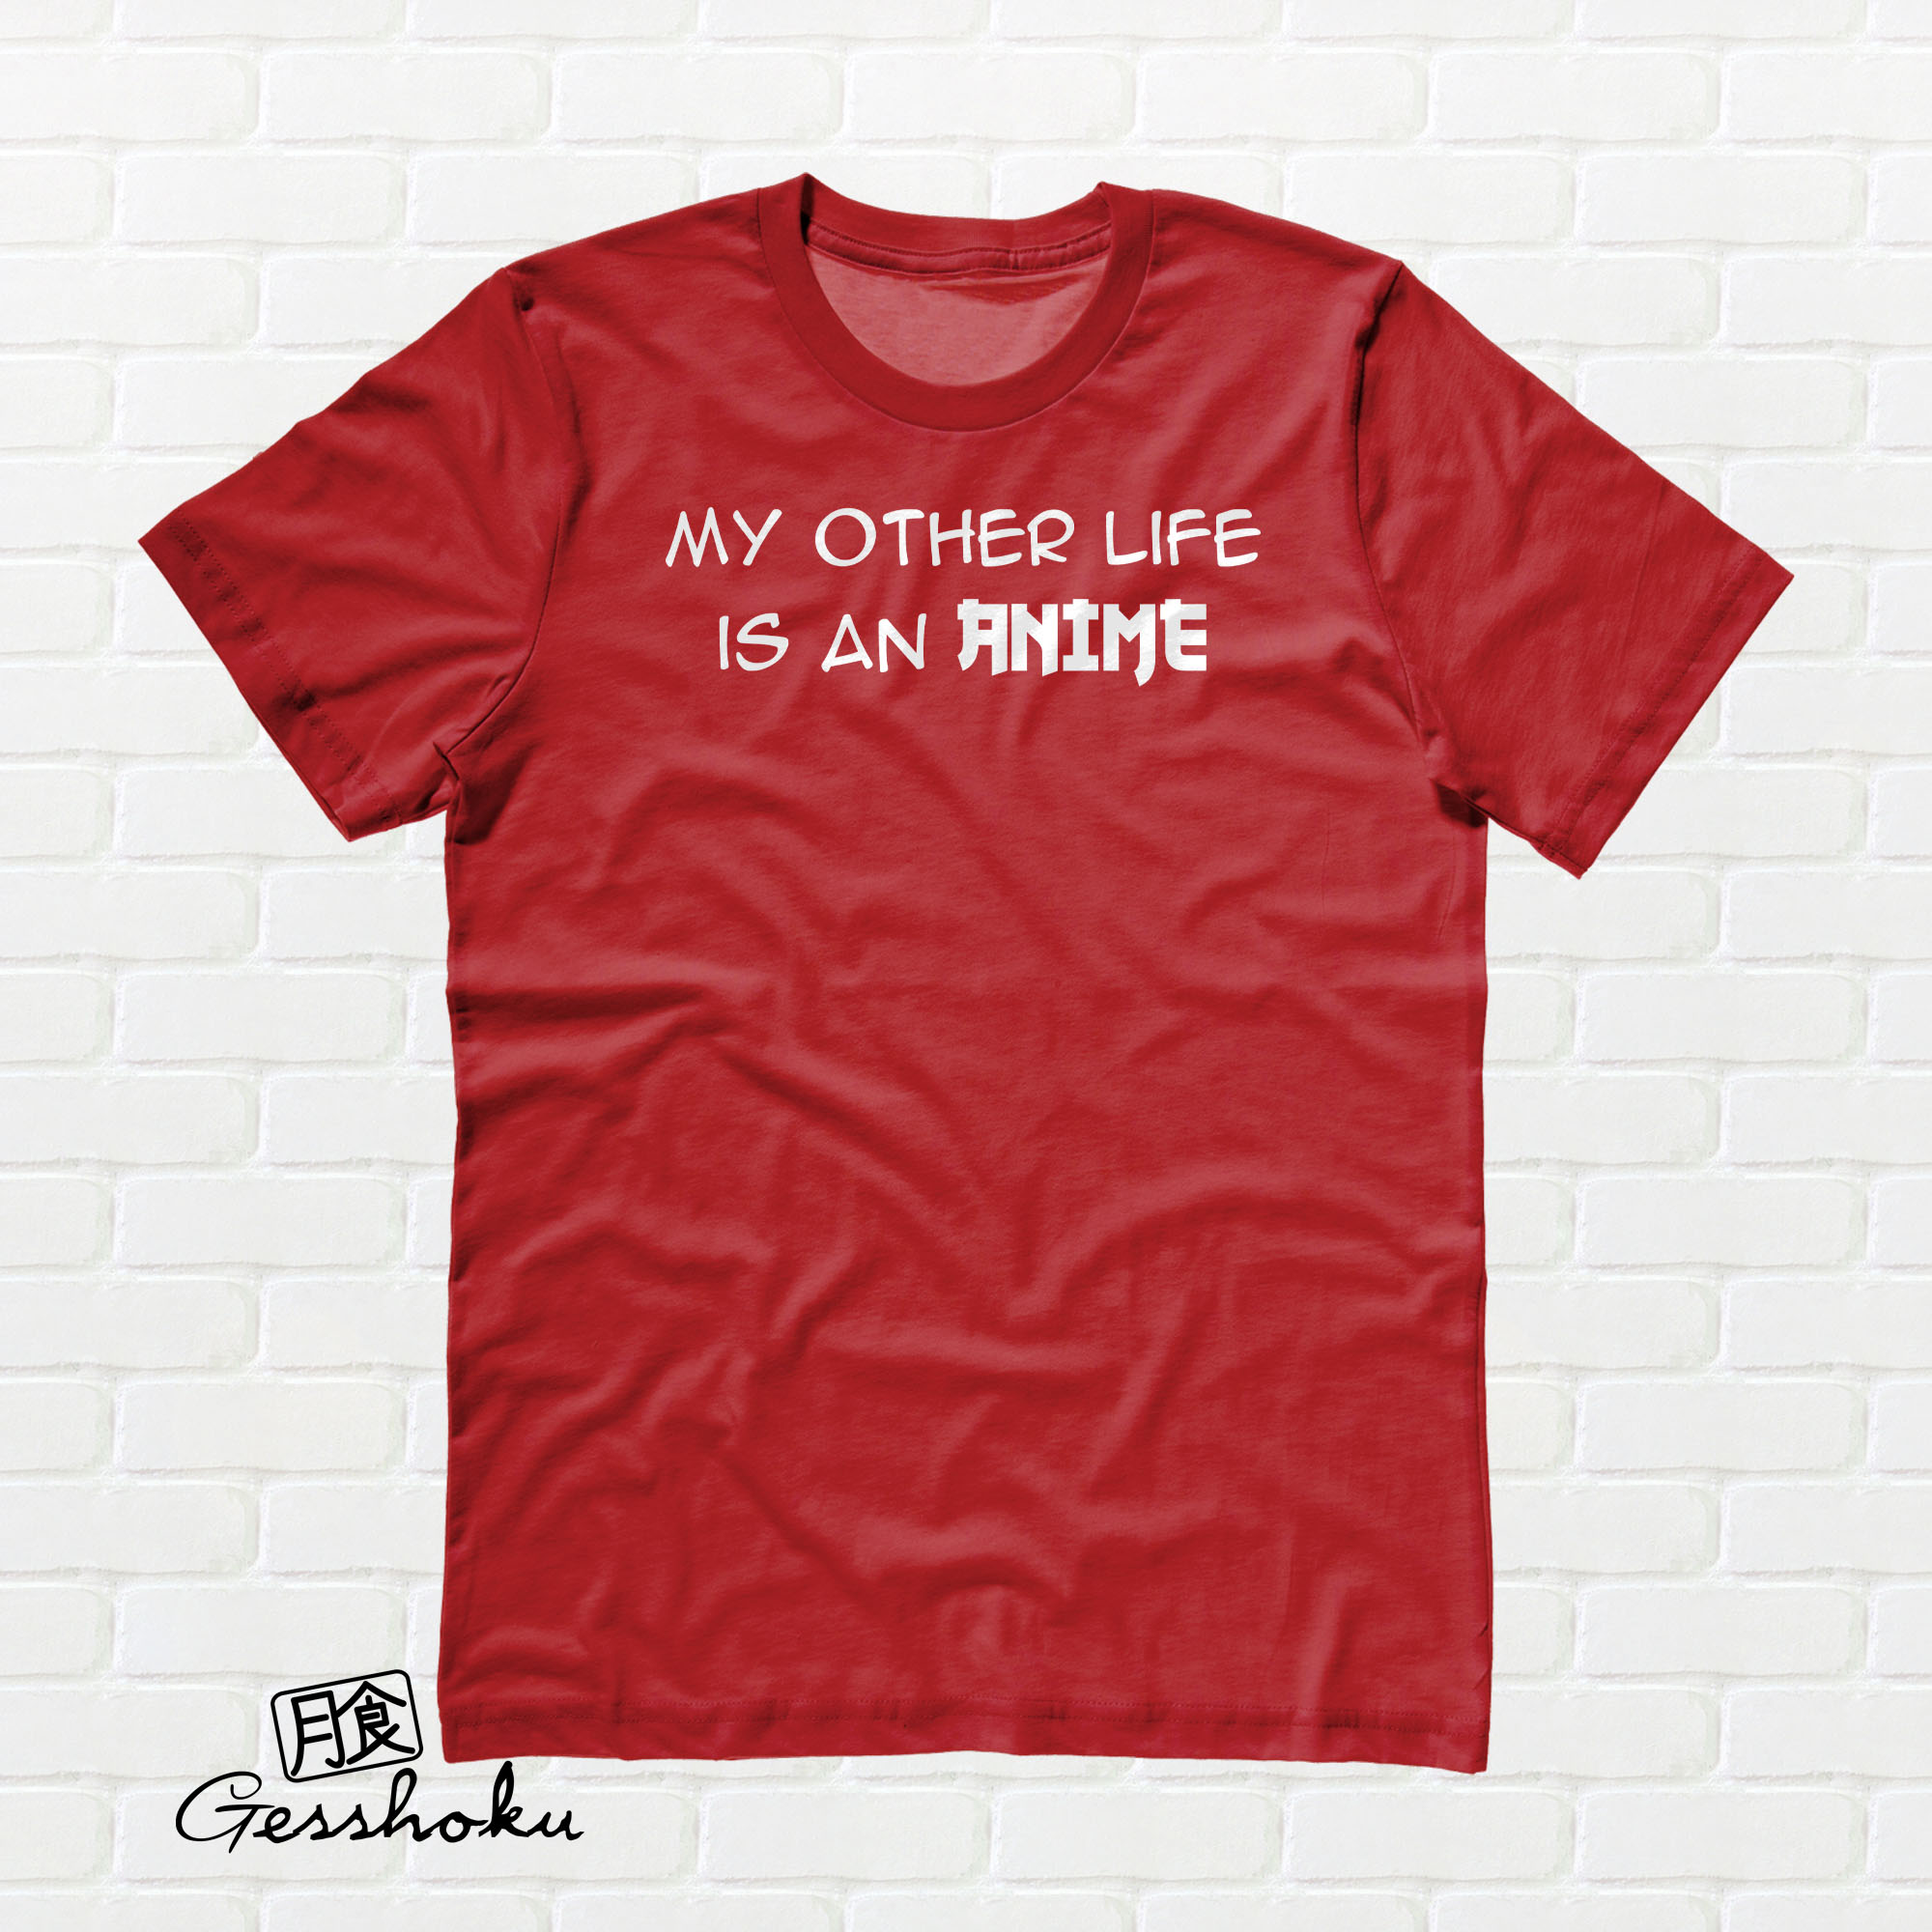 My Other Life is an Anime T-shirt - Red